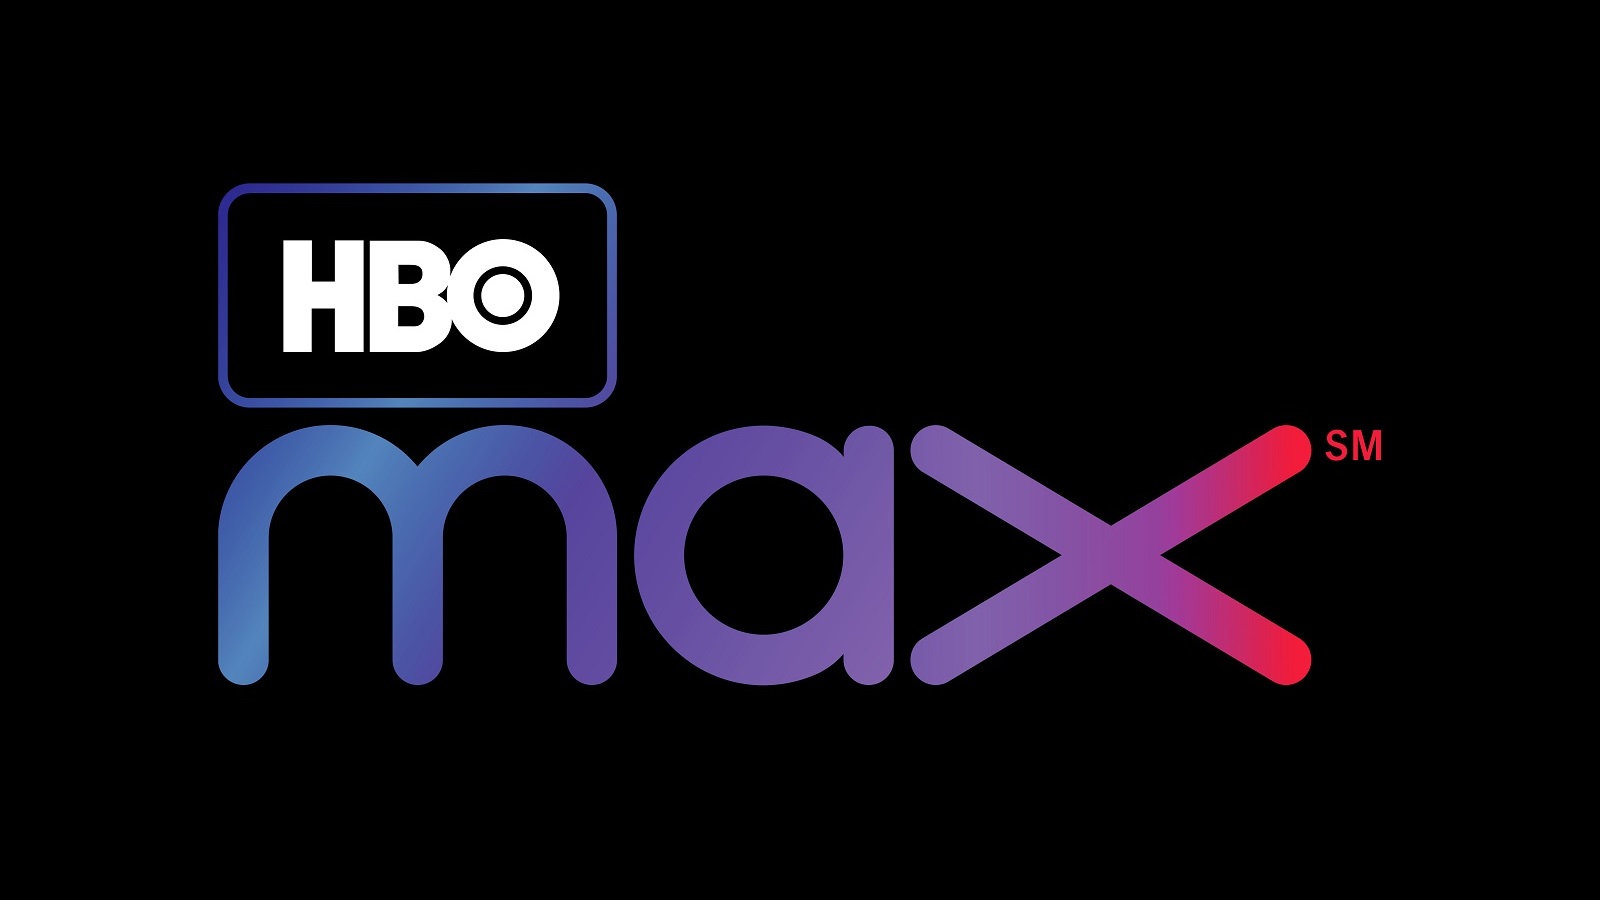 WarnerMedia Launches New Film Label Specifically For HBO Max Service, Which DC Character Will Get Films?